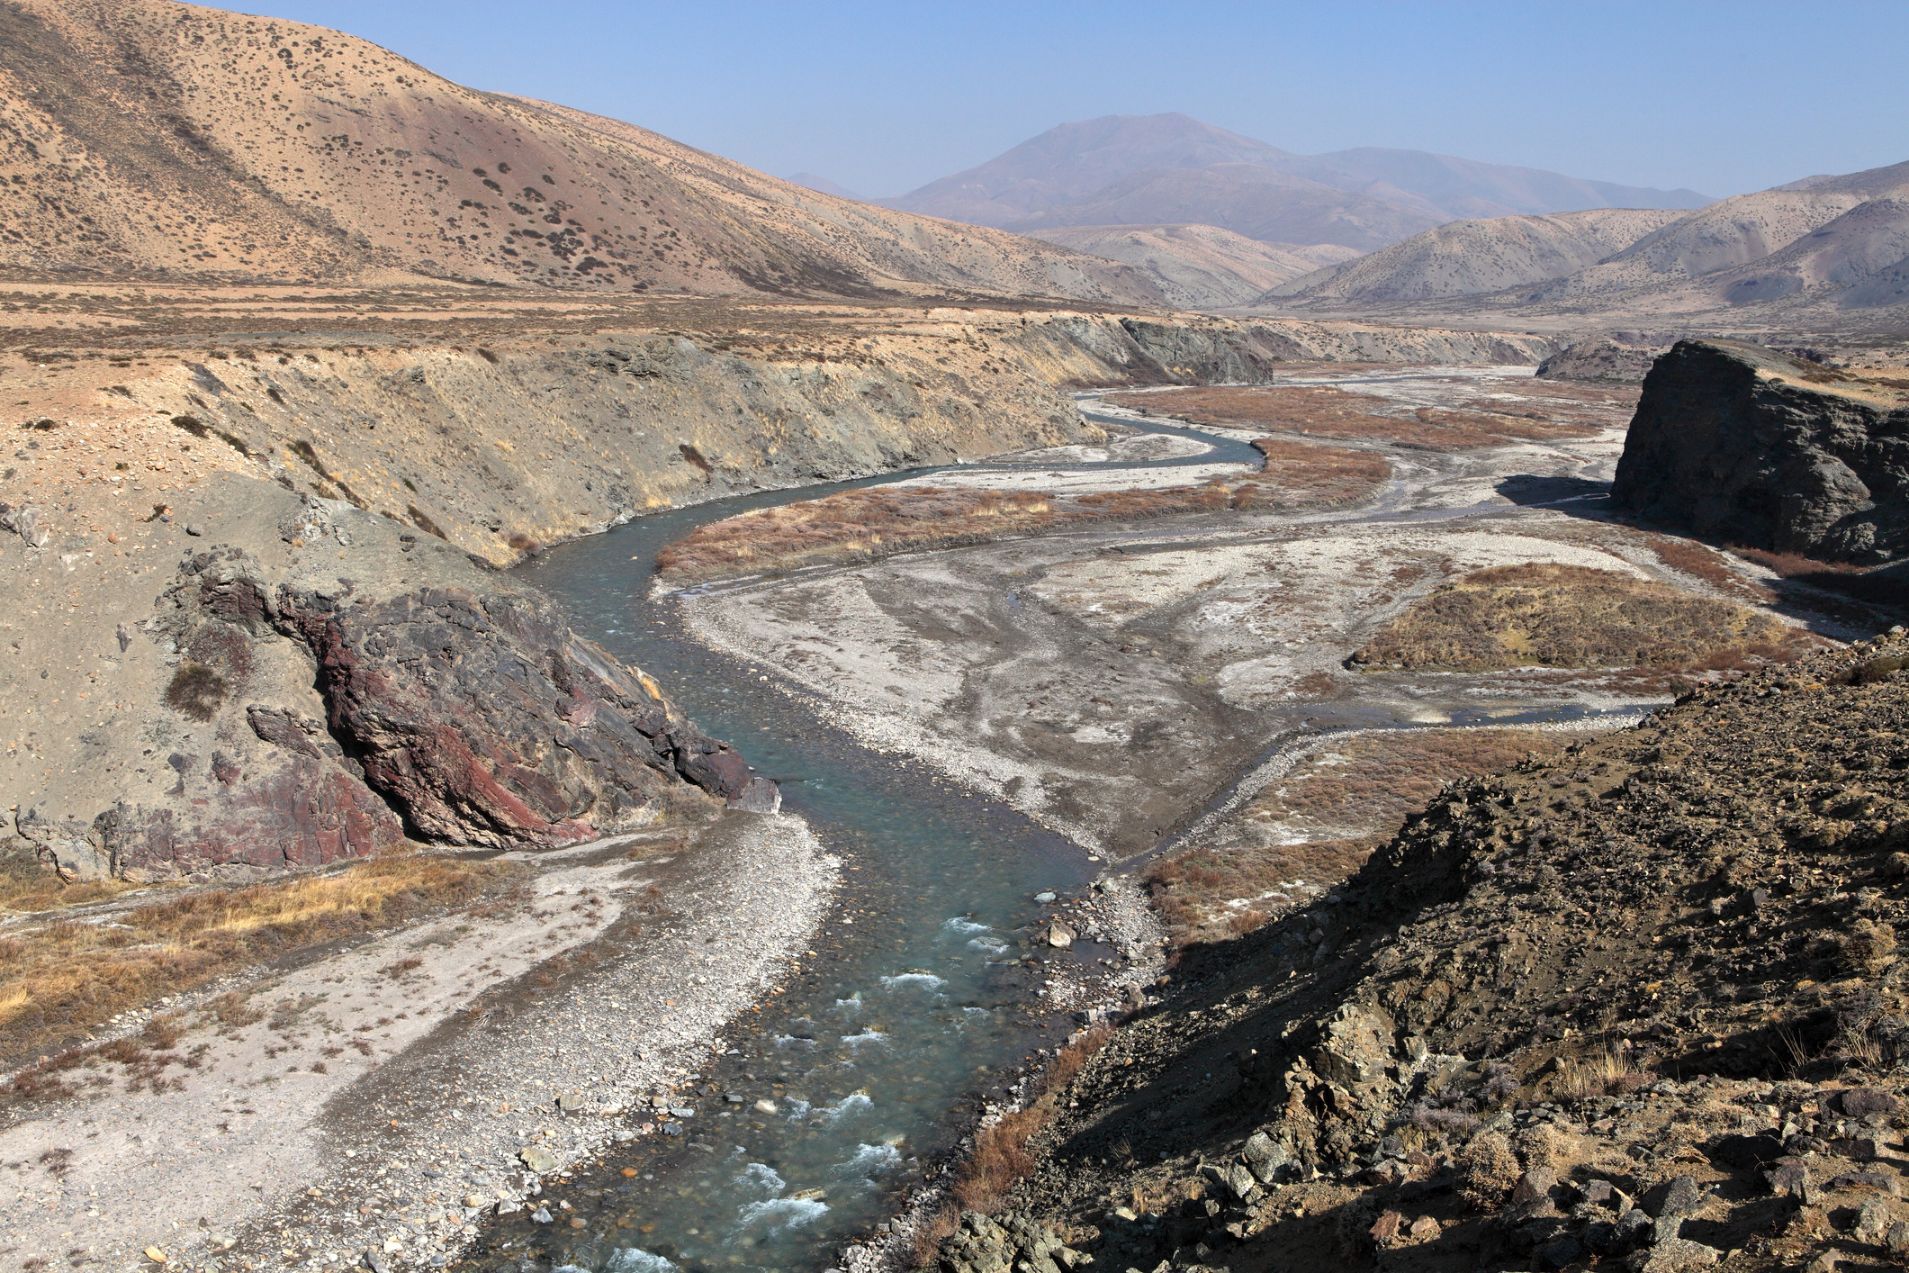 The Karnali River, running through the arid landscapes of western Nepal and Tibet